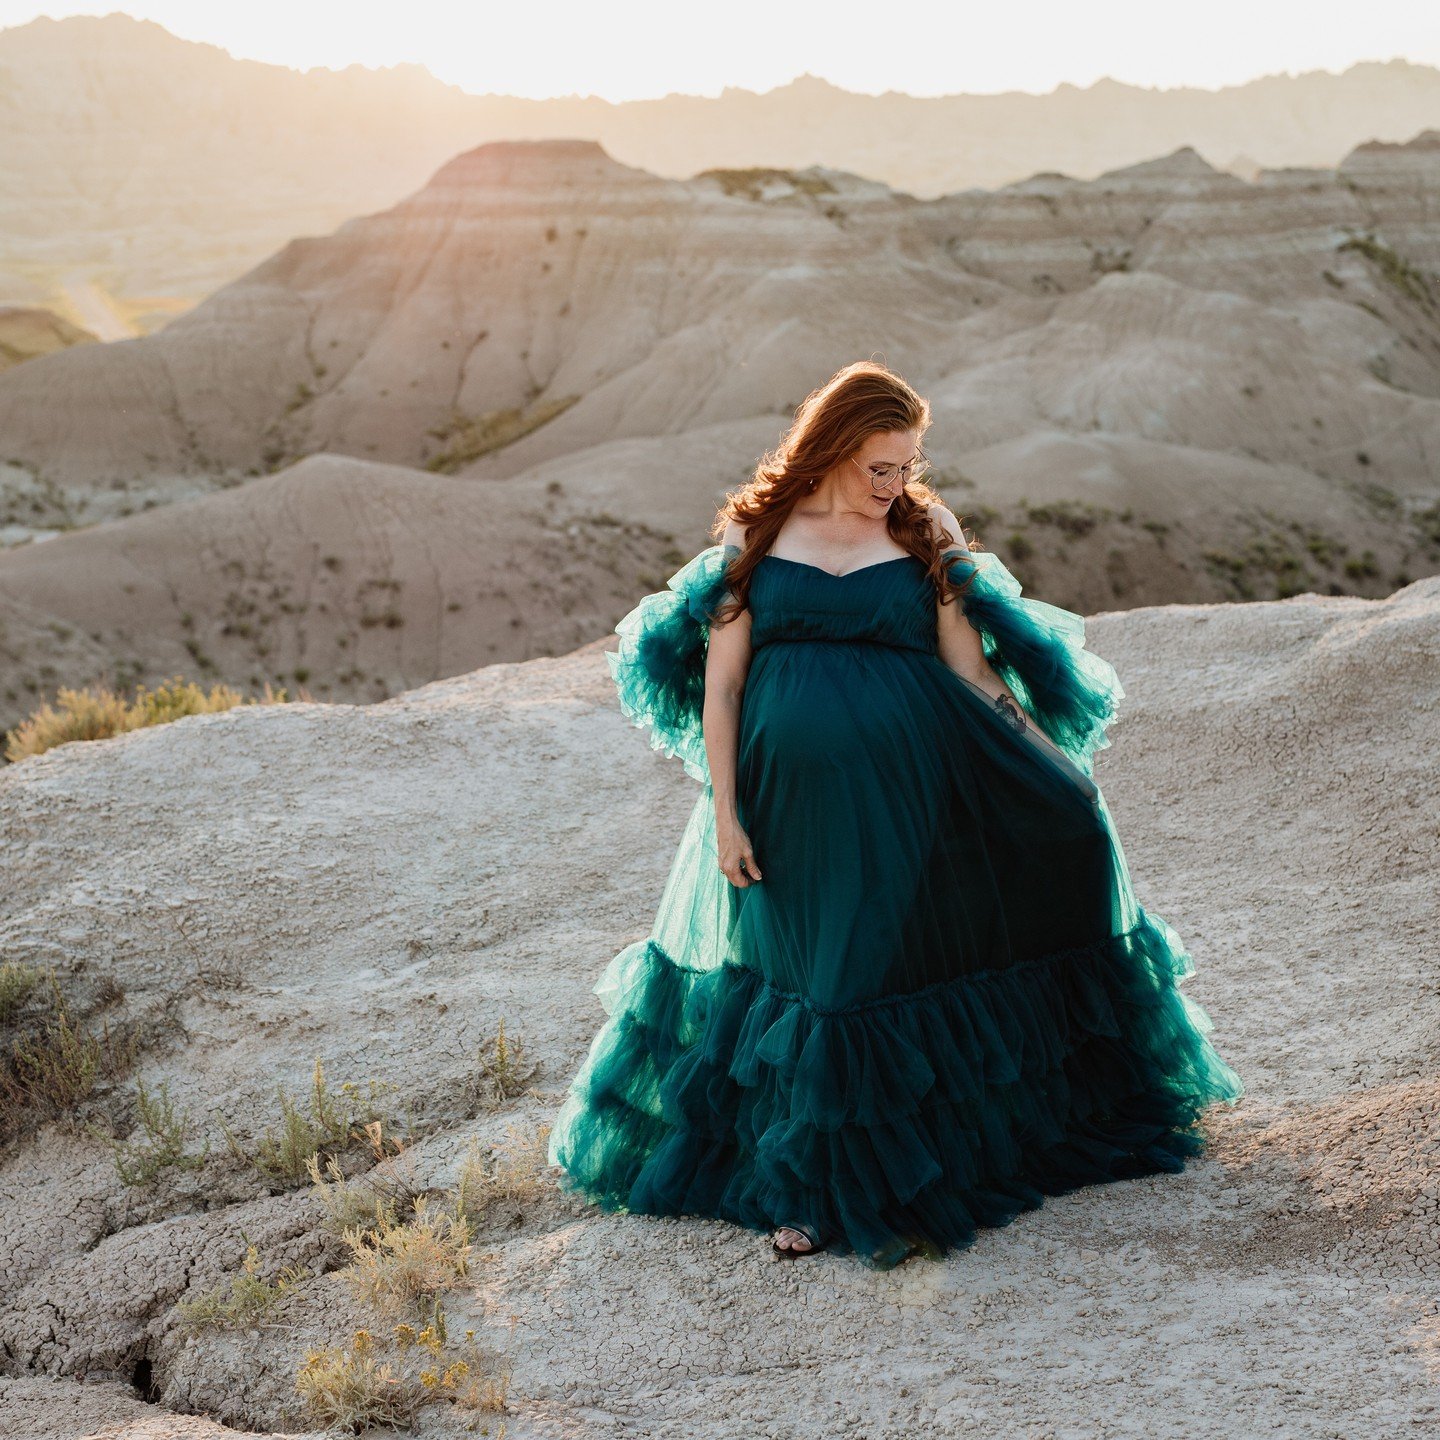 Today's post is about another session I offer. It's the one it all starts with for the genre I have chosen to work in. 
Maternity!
I LOVVVVVVVVVVVVEEEEEEE baby bump pix. Especially in the Badlands. I'm pretty sure that's usually the first location I 